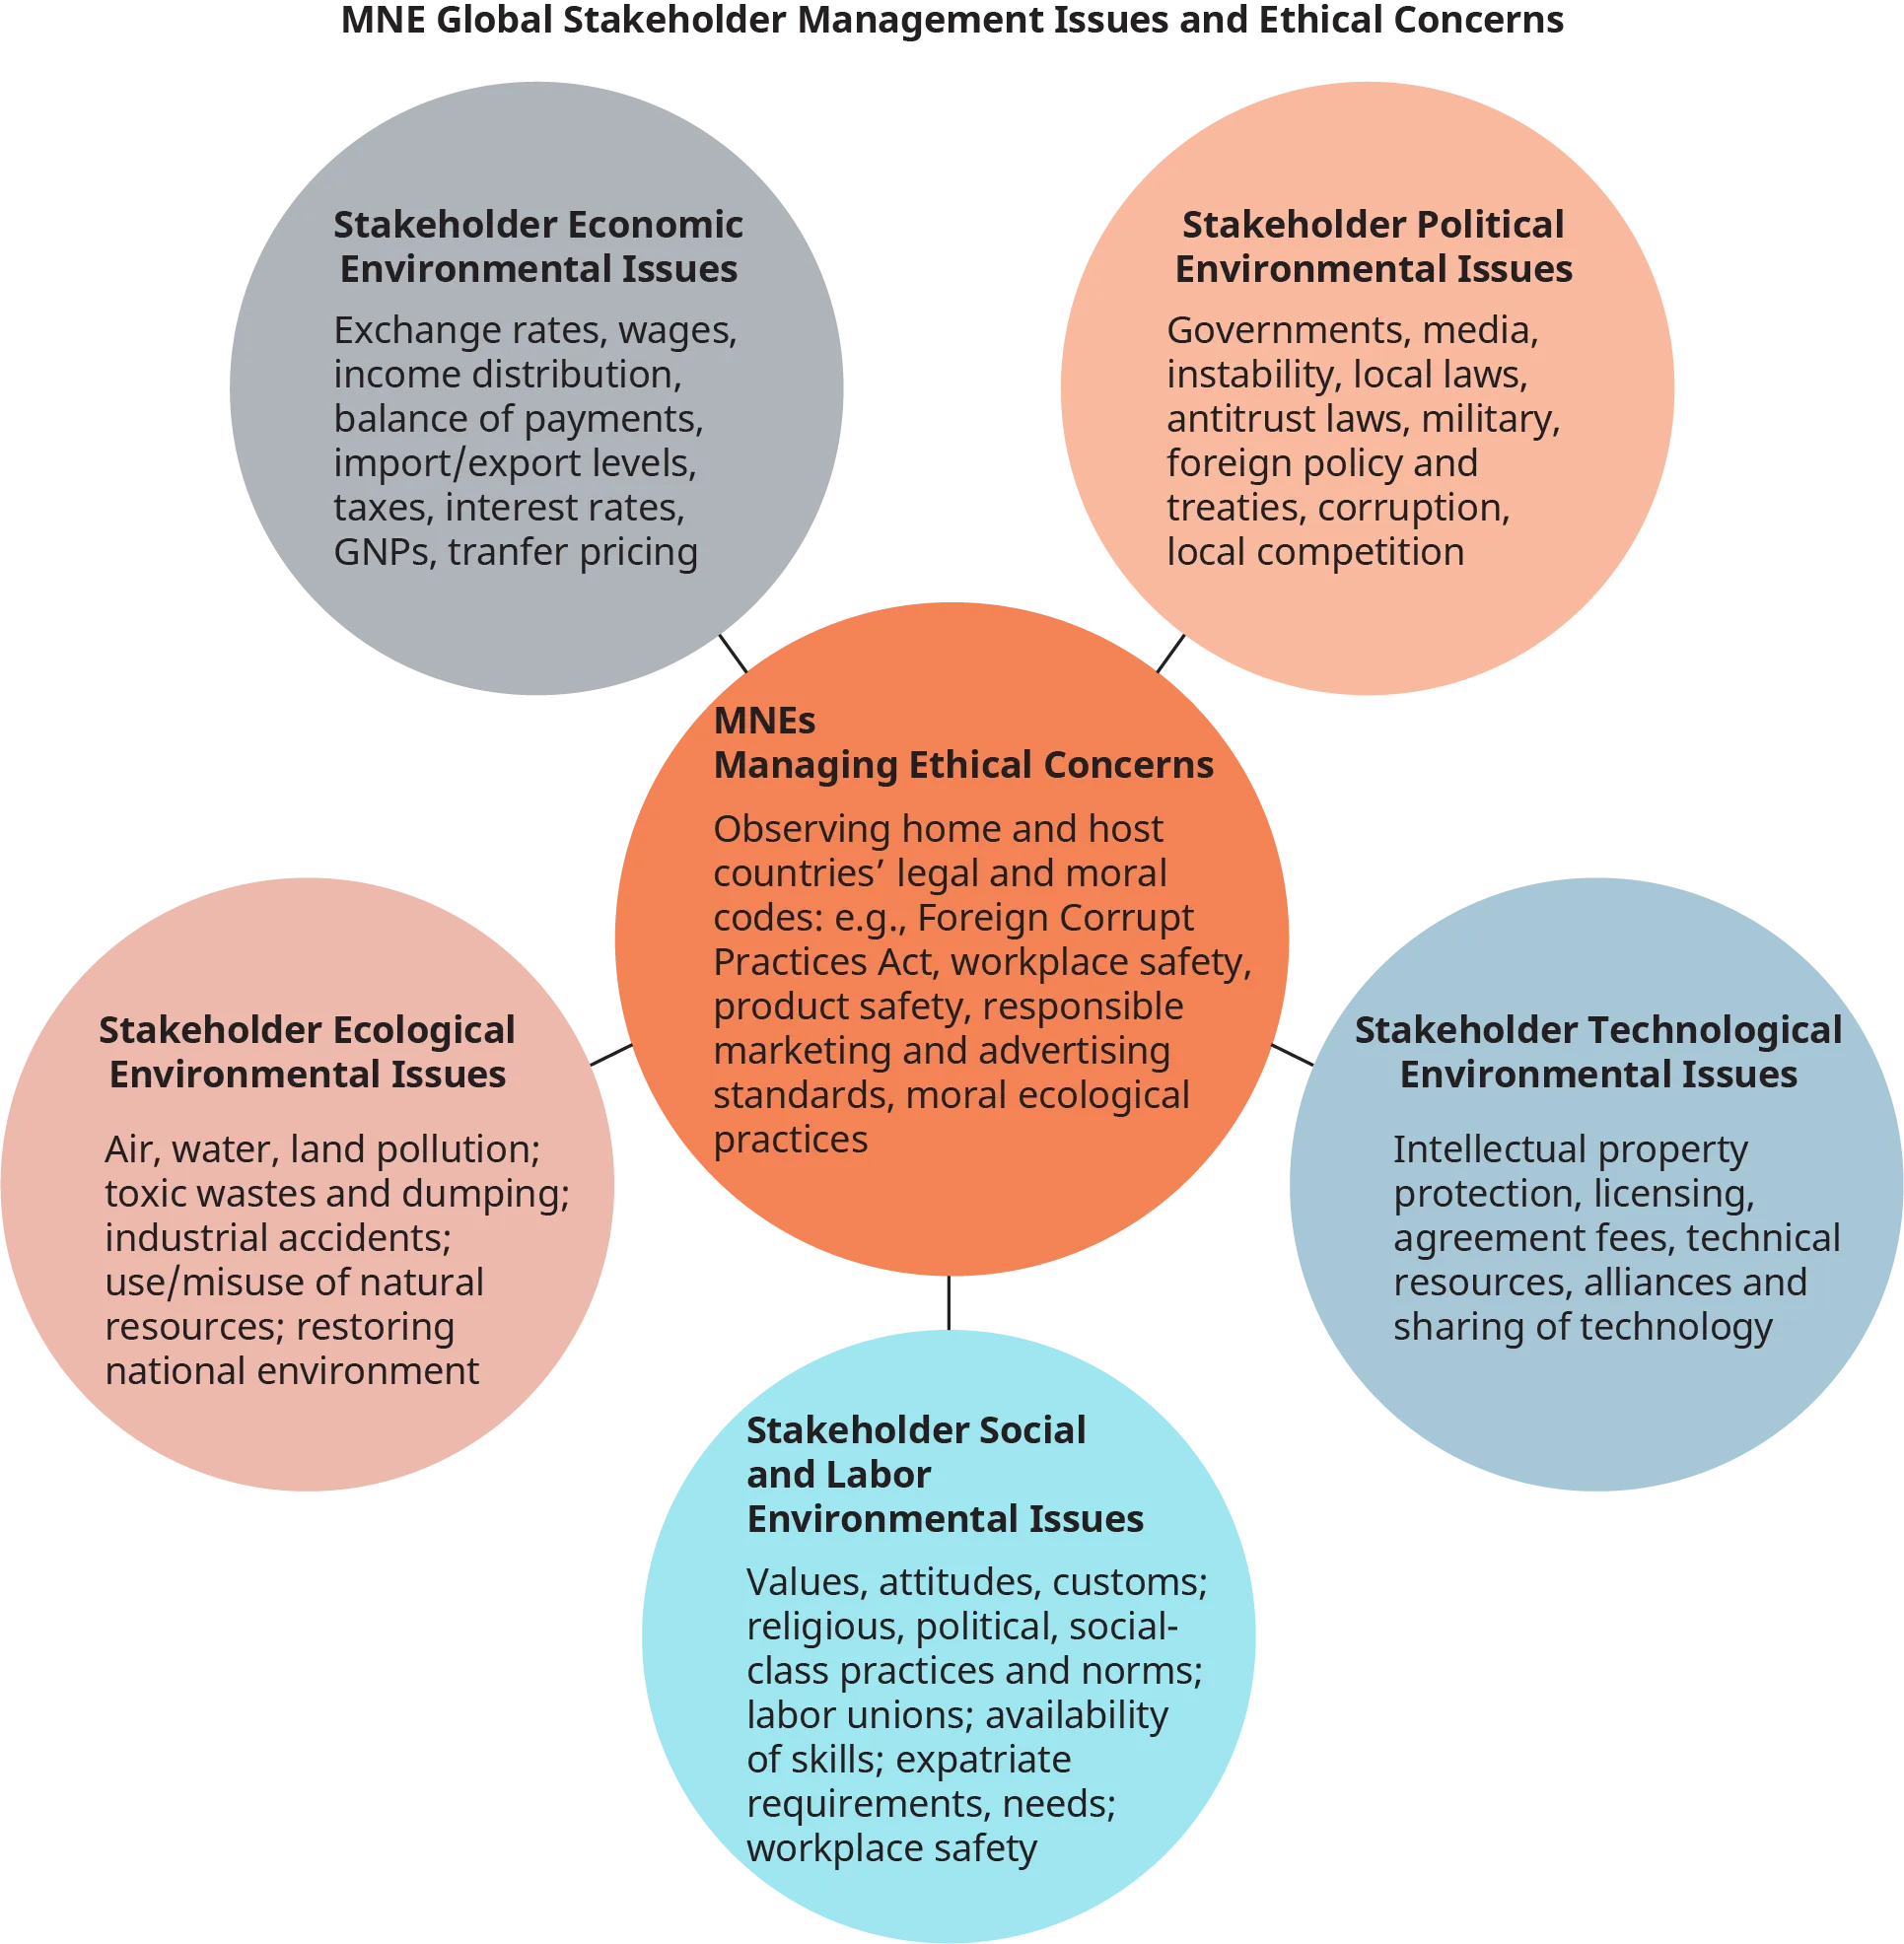 An illustration lists some of the major stakeholder’s management and ethical issues, managed by multinational enterprises.